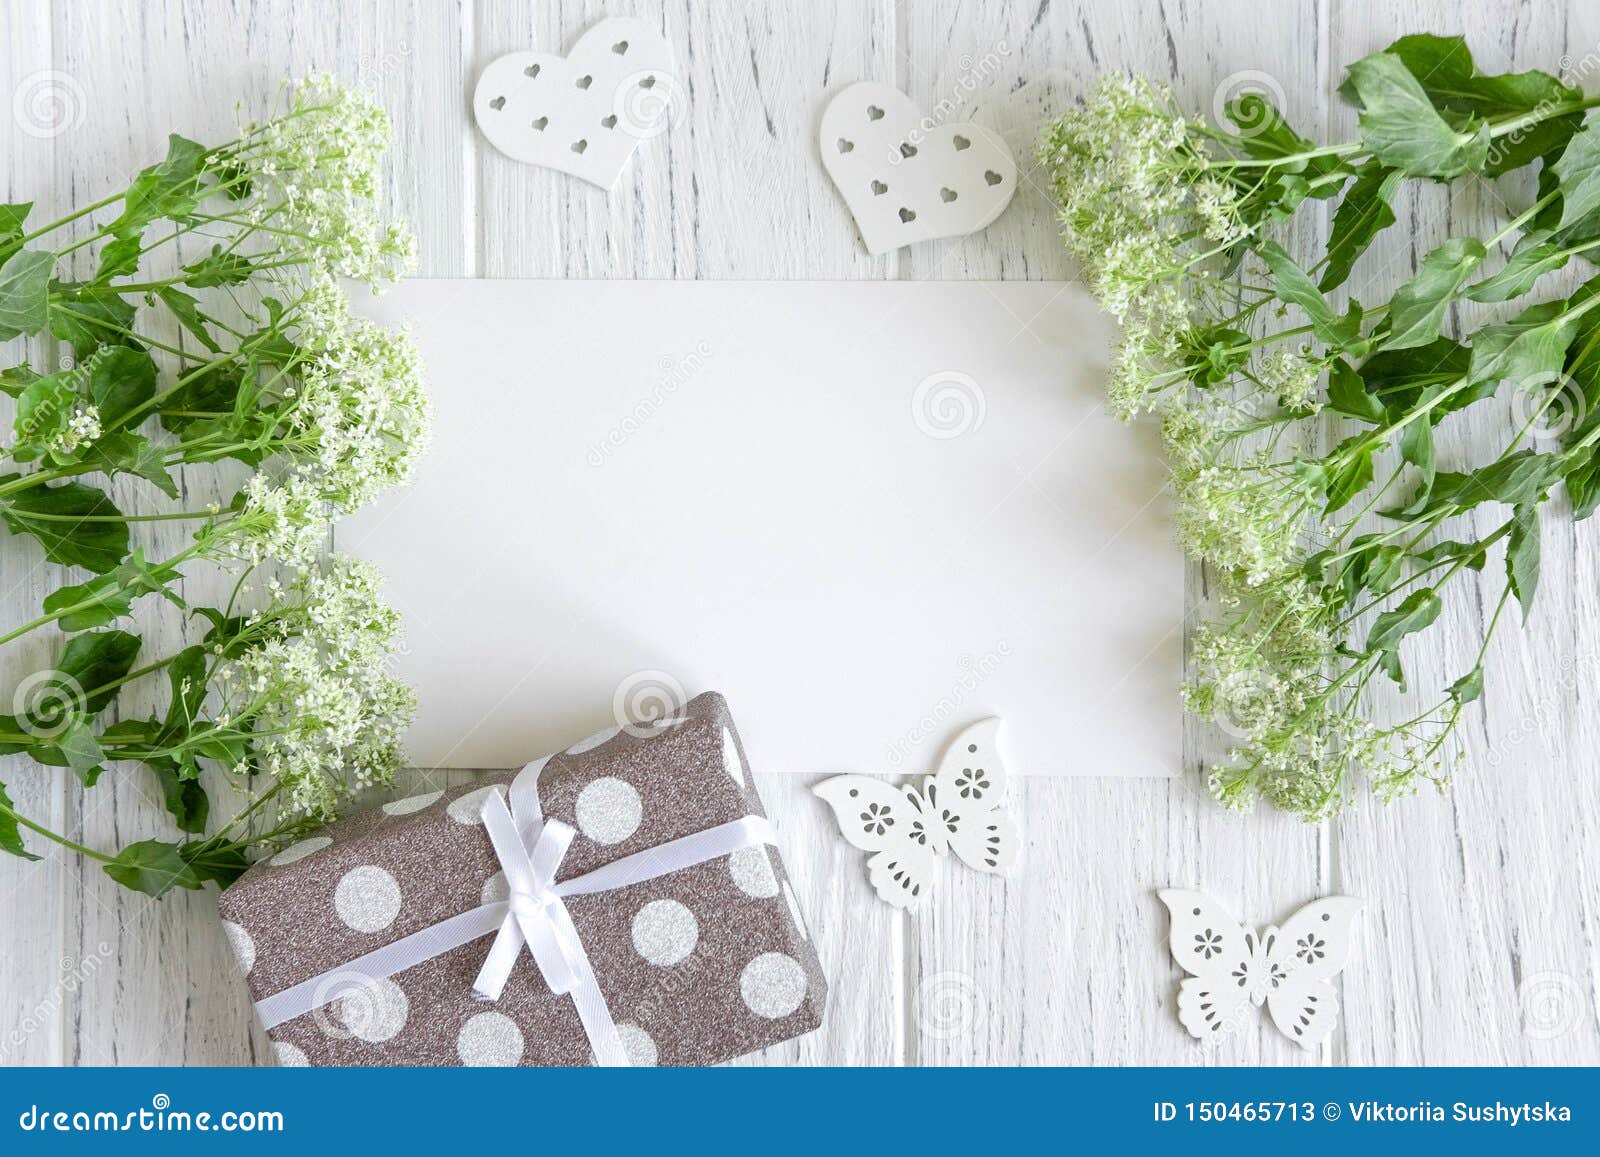 Wedding Greeting Card Mockup with Green Flowers and Gift on White ...